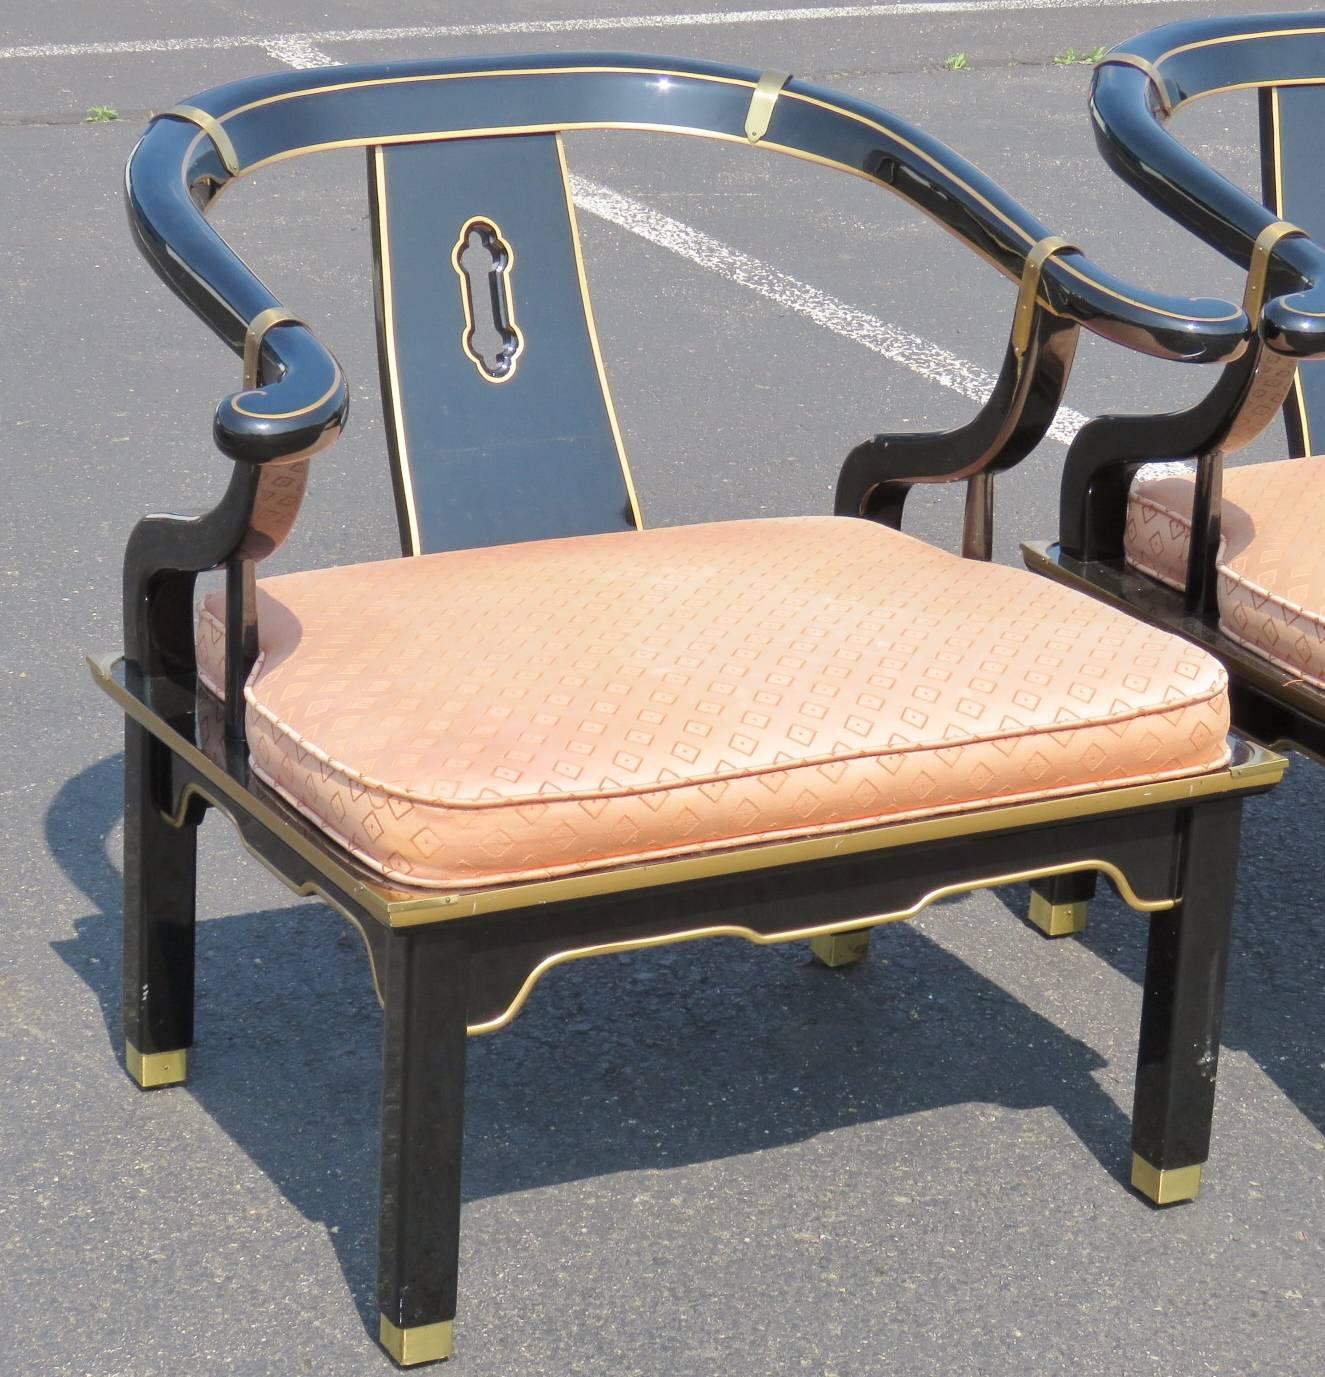 20th Century Pair of Asian Style Ebonized Arm Chairs In the style of James Mont